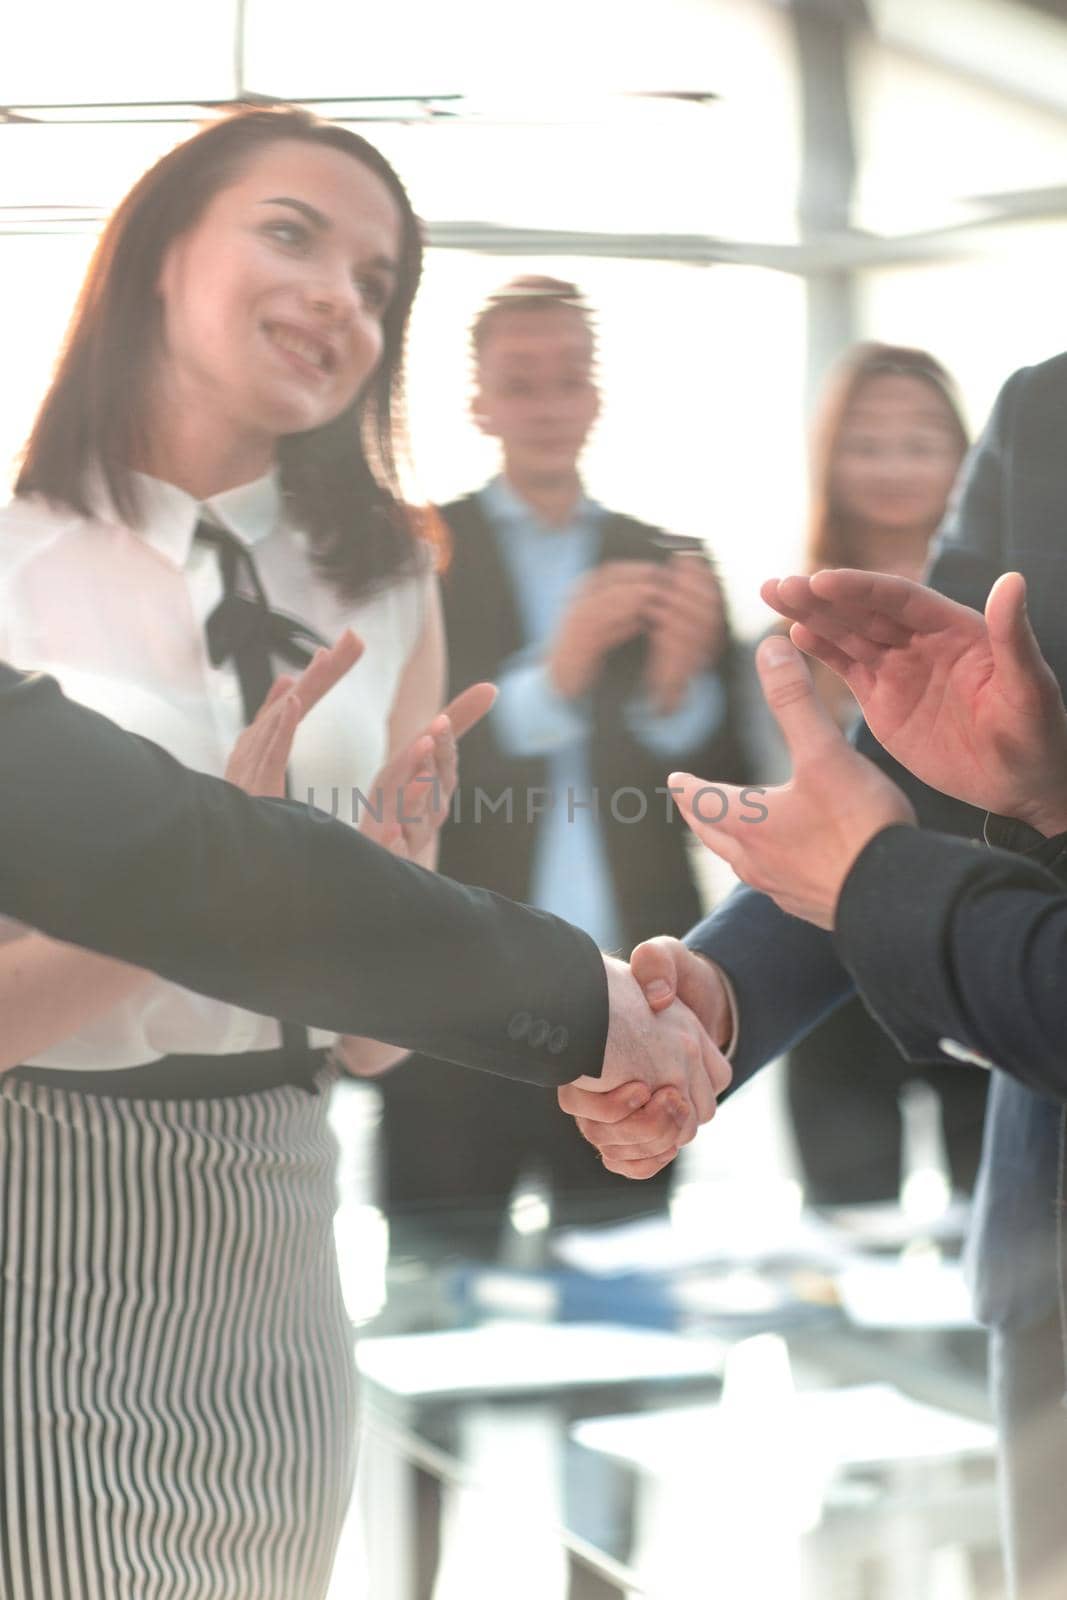 Handshake in front of business people by asdf